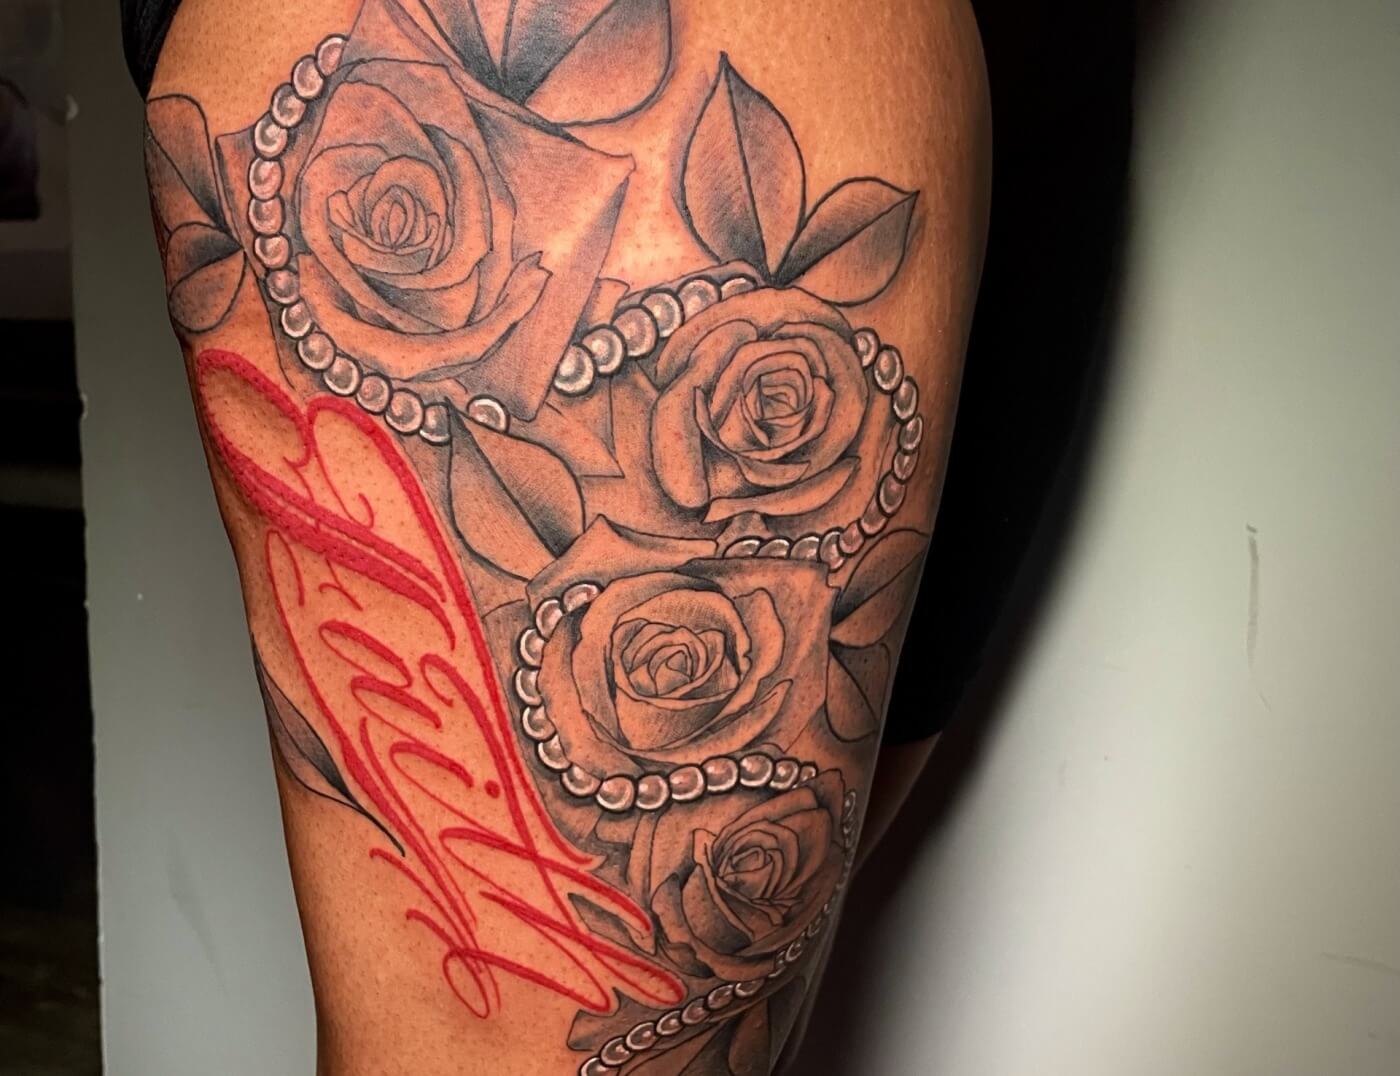 Beautiful red floral script tattoo (lettering) by Lyric The Artist at Iron Palm Tattoos & Body Piercing in downtown Atlanta, GA. Lyric is one of the most creative tattoo artists in the southeastern United States. We're open late night til 2AM most nights. Call 404-973-7828 or stop by for a free consultation. Walk-Ins are welcome.